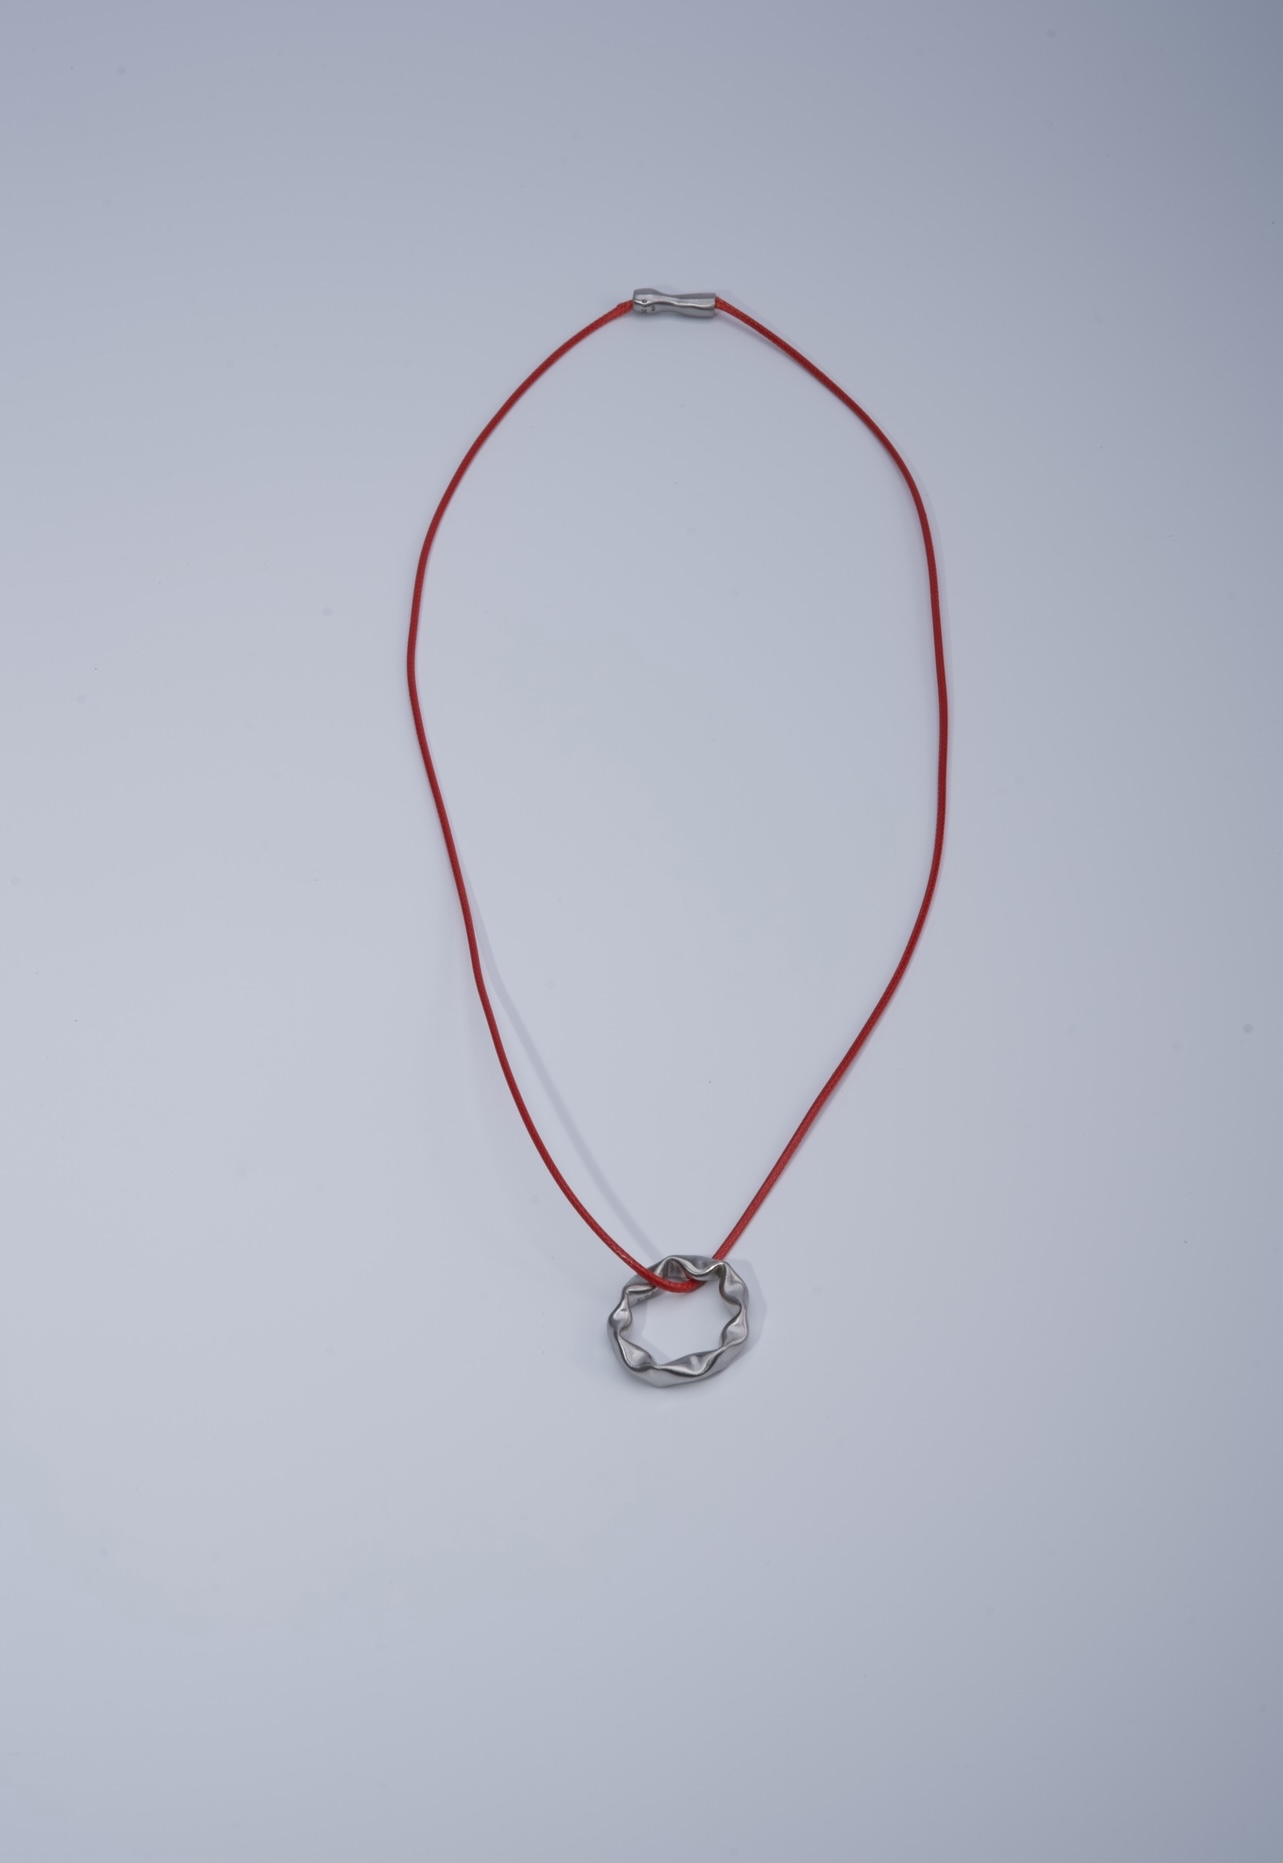 24K white gold vermeil pendant in 925 silver with red silk cord-1